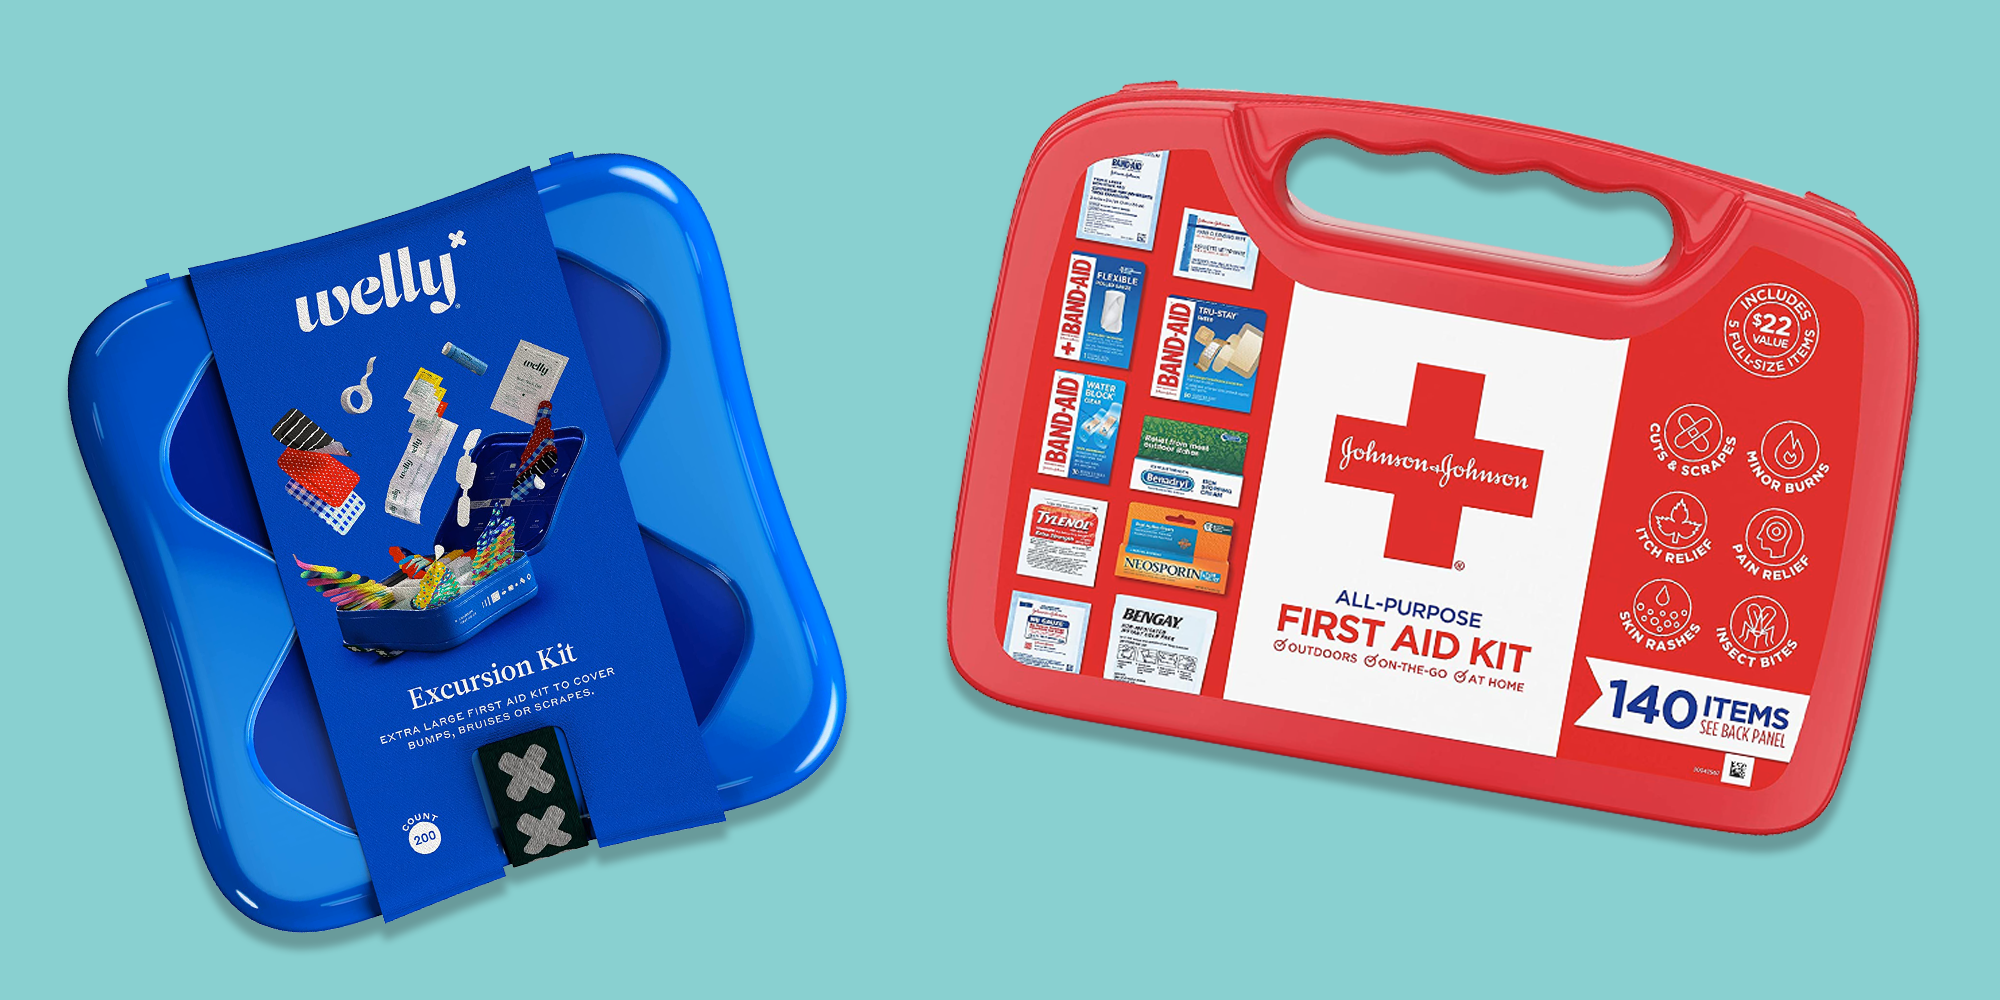 on-the-go-first-aid-kit – Welly